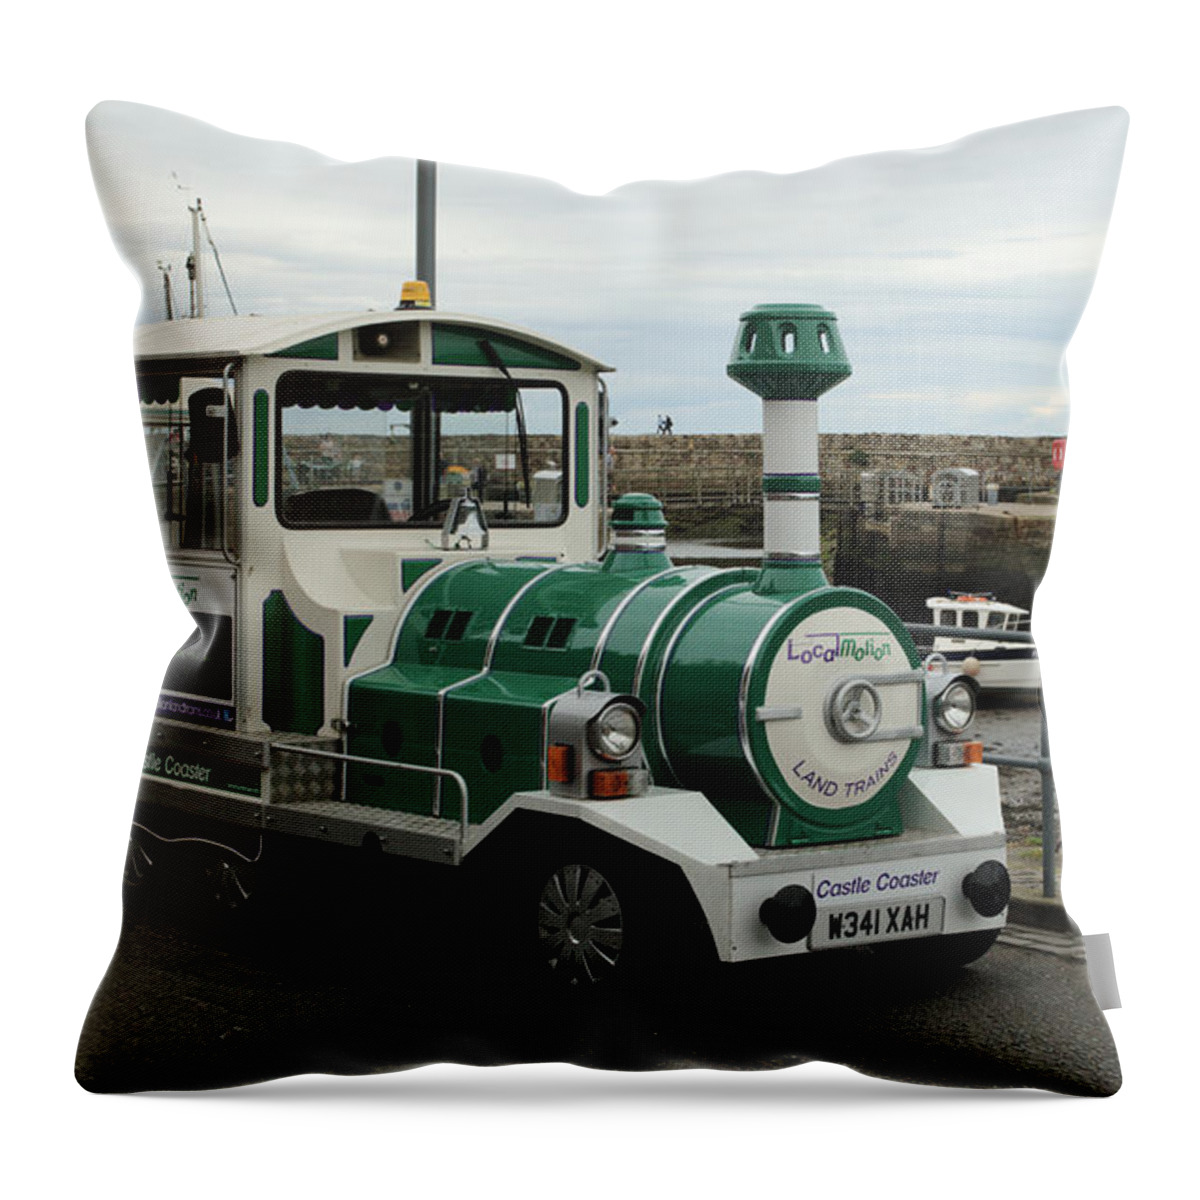 Land Throw Pillow featuring the photograph Land Train In St Andrews Harbour by Adrian Wale